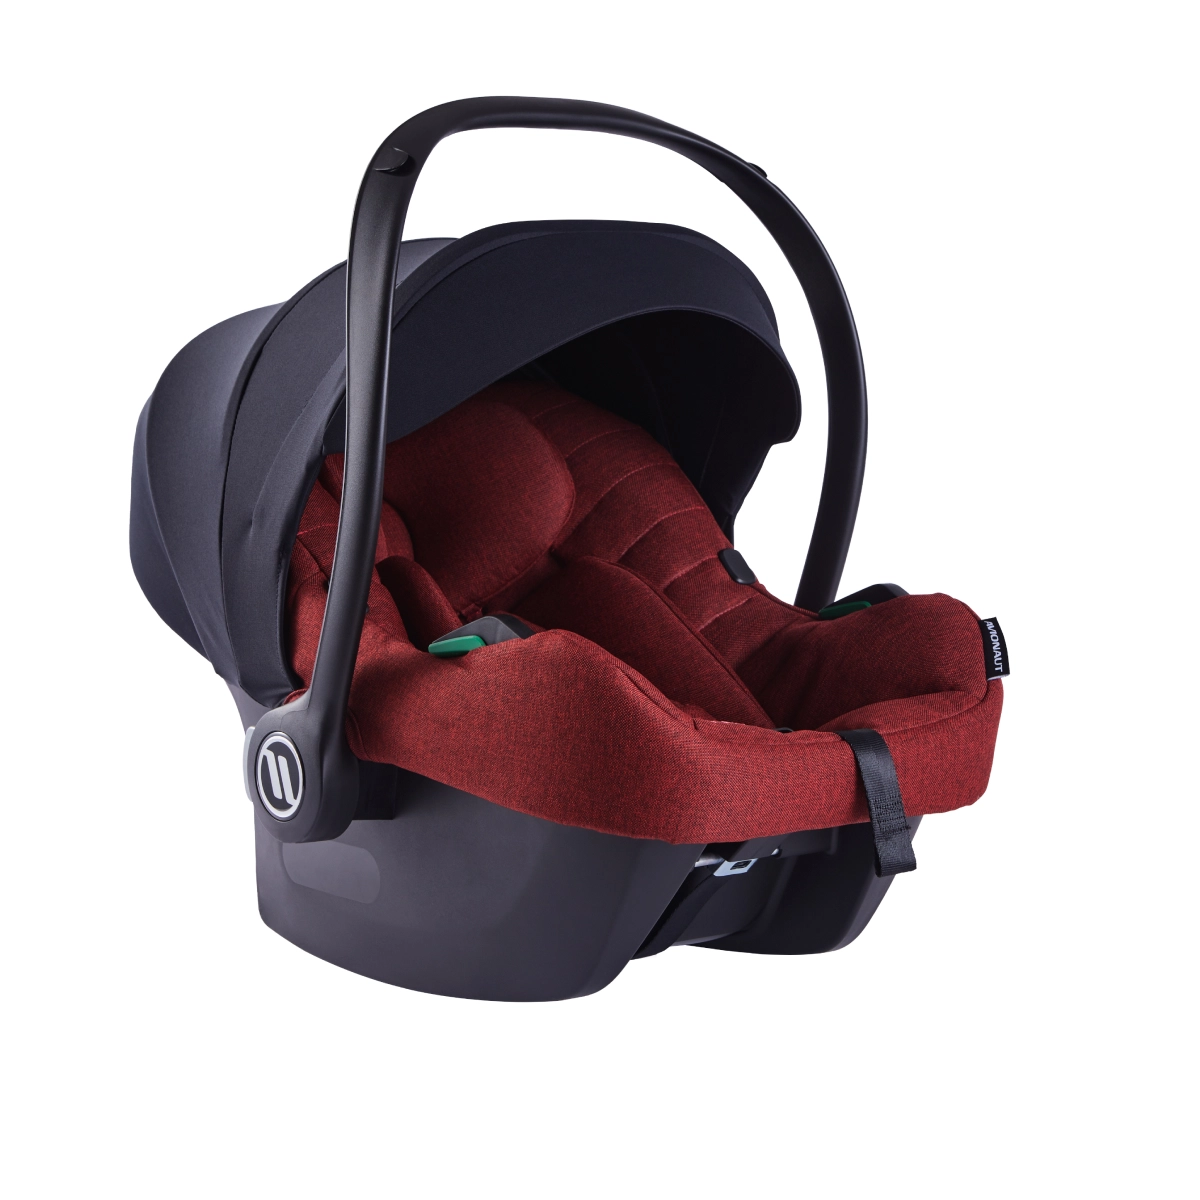 Avionaut Cosmo Car Seat and Isofix Base - Red-1